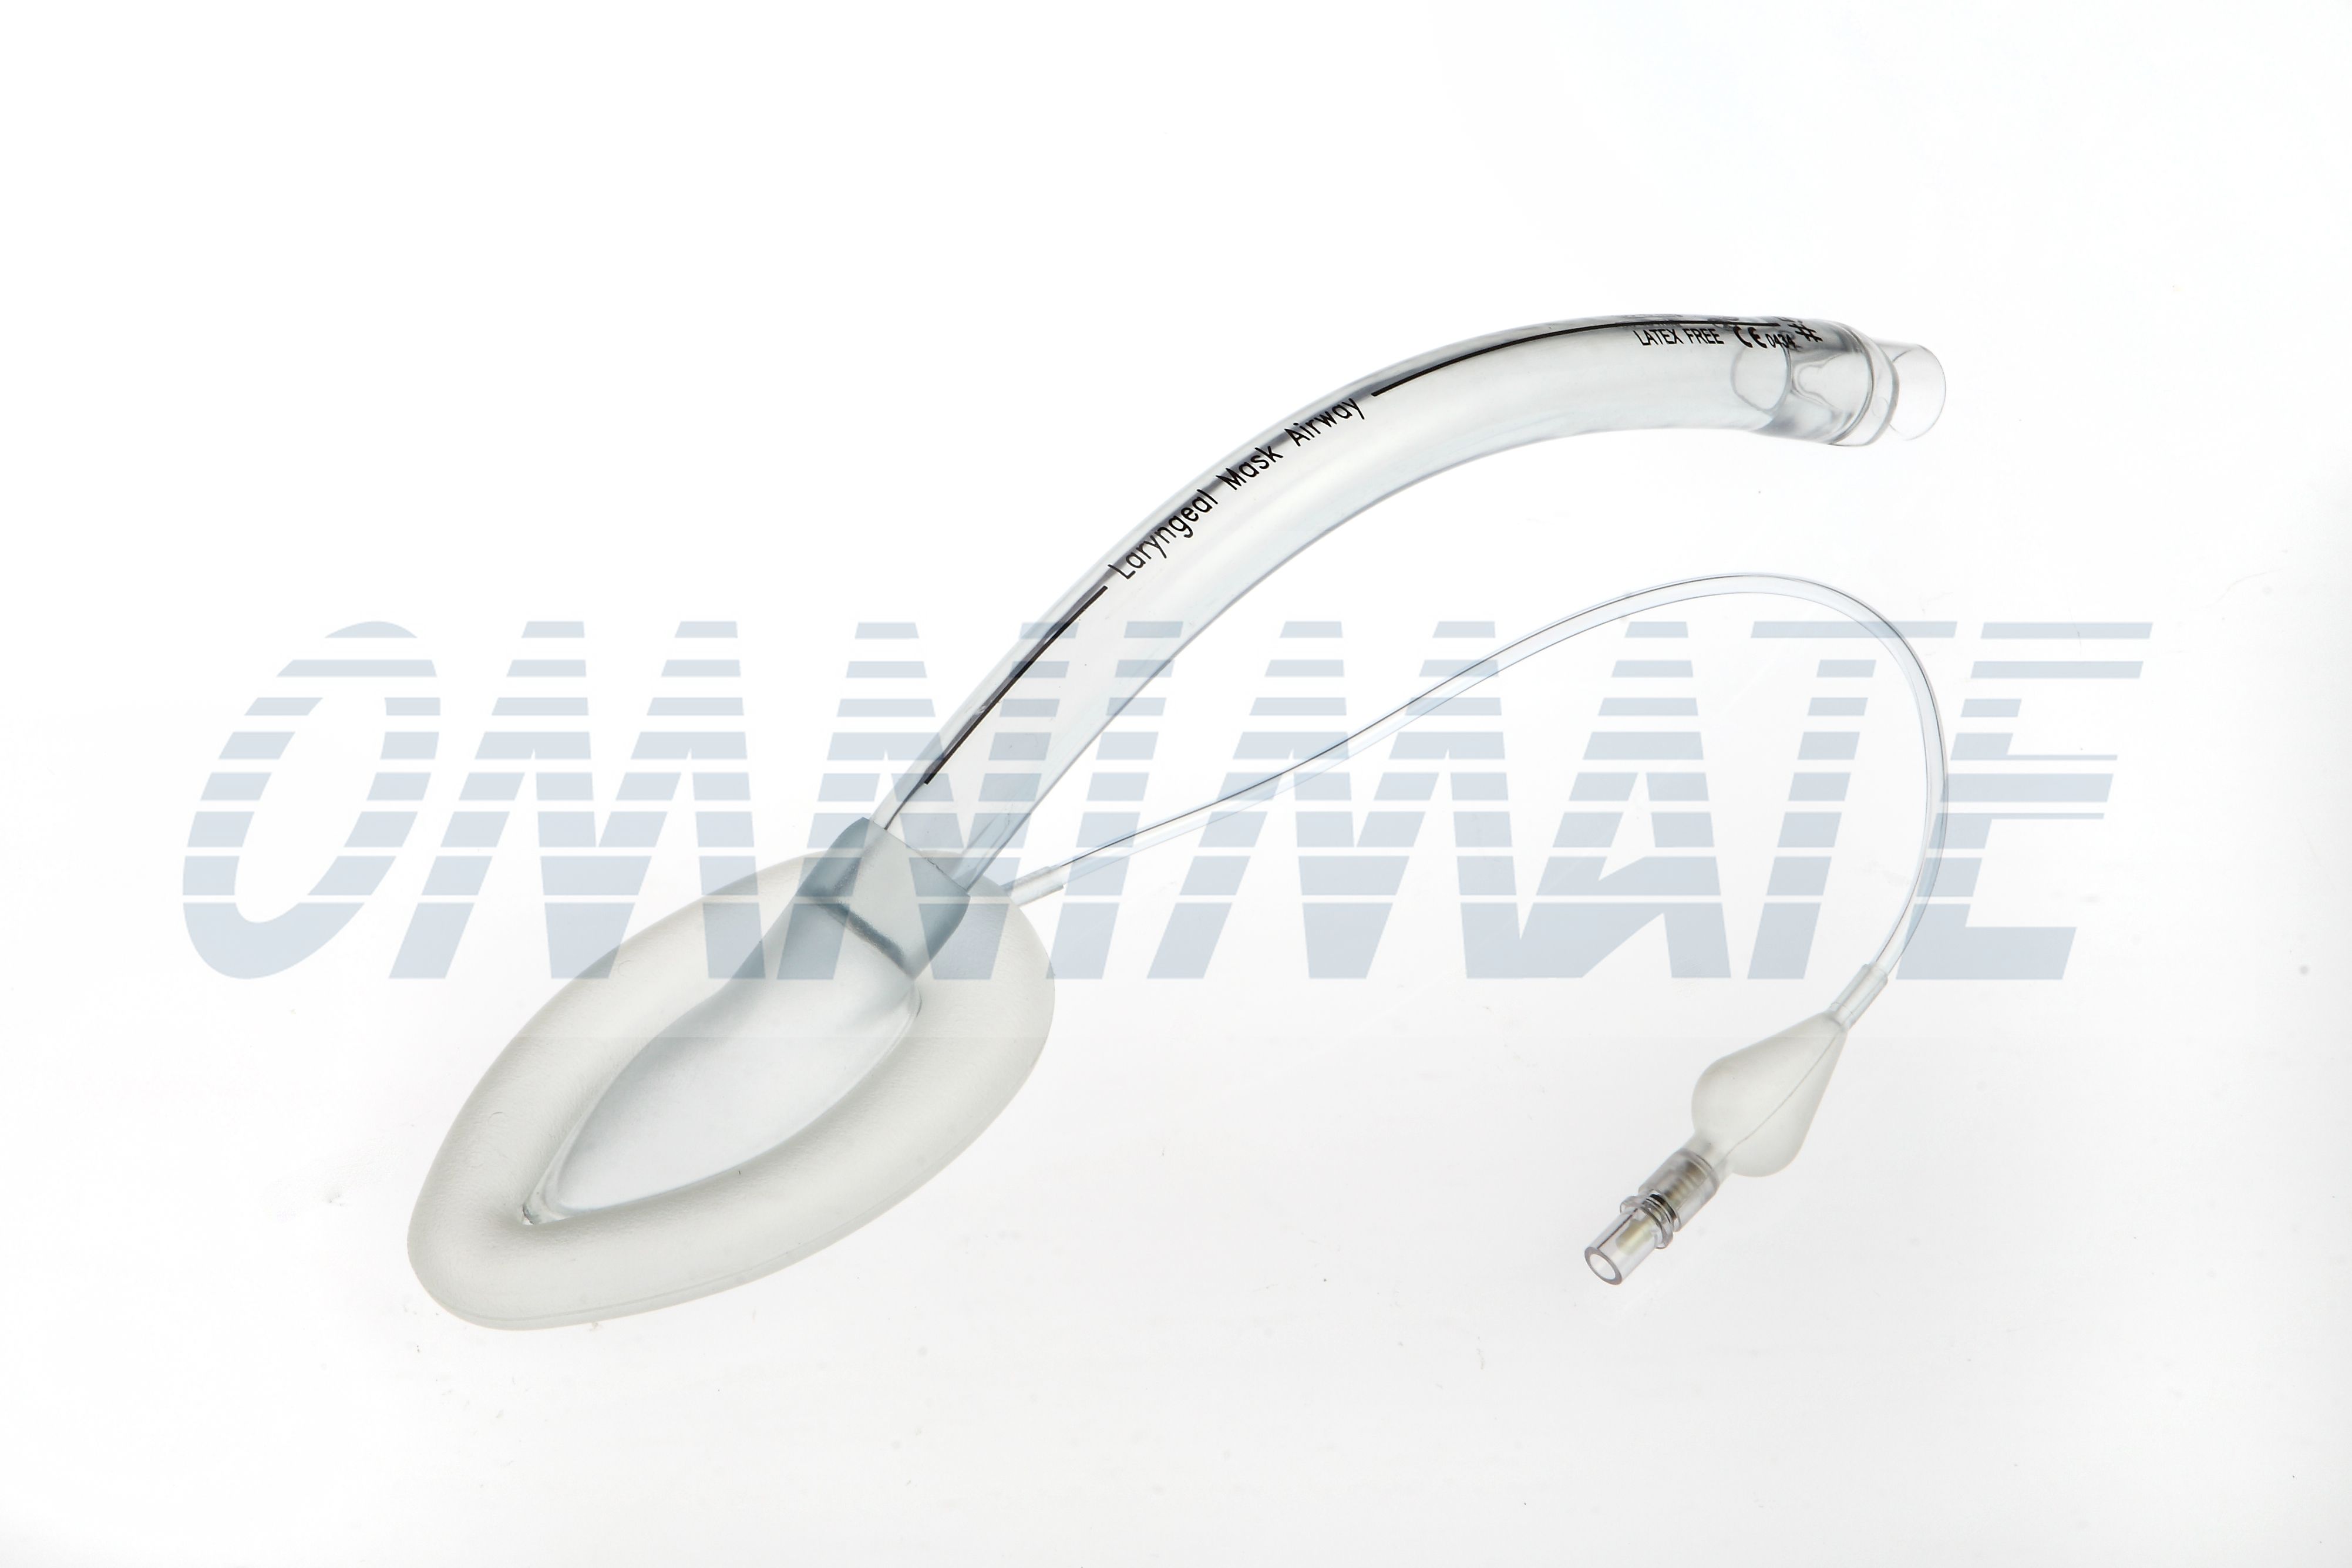 A laryngeal mask airway (LMA) — also known as laryngeal mask — is a medical device that keeps a patient's airway open during anaesthesia or unconsciousness.